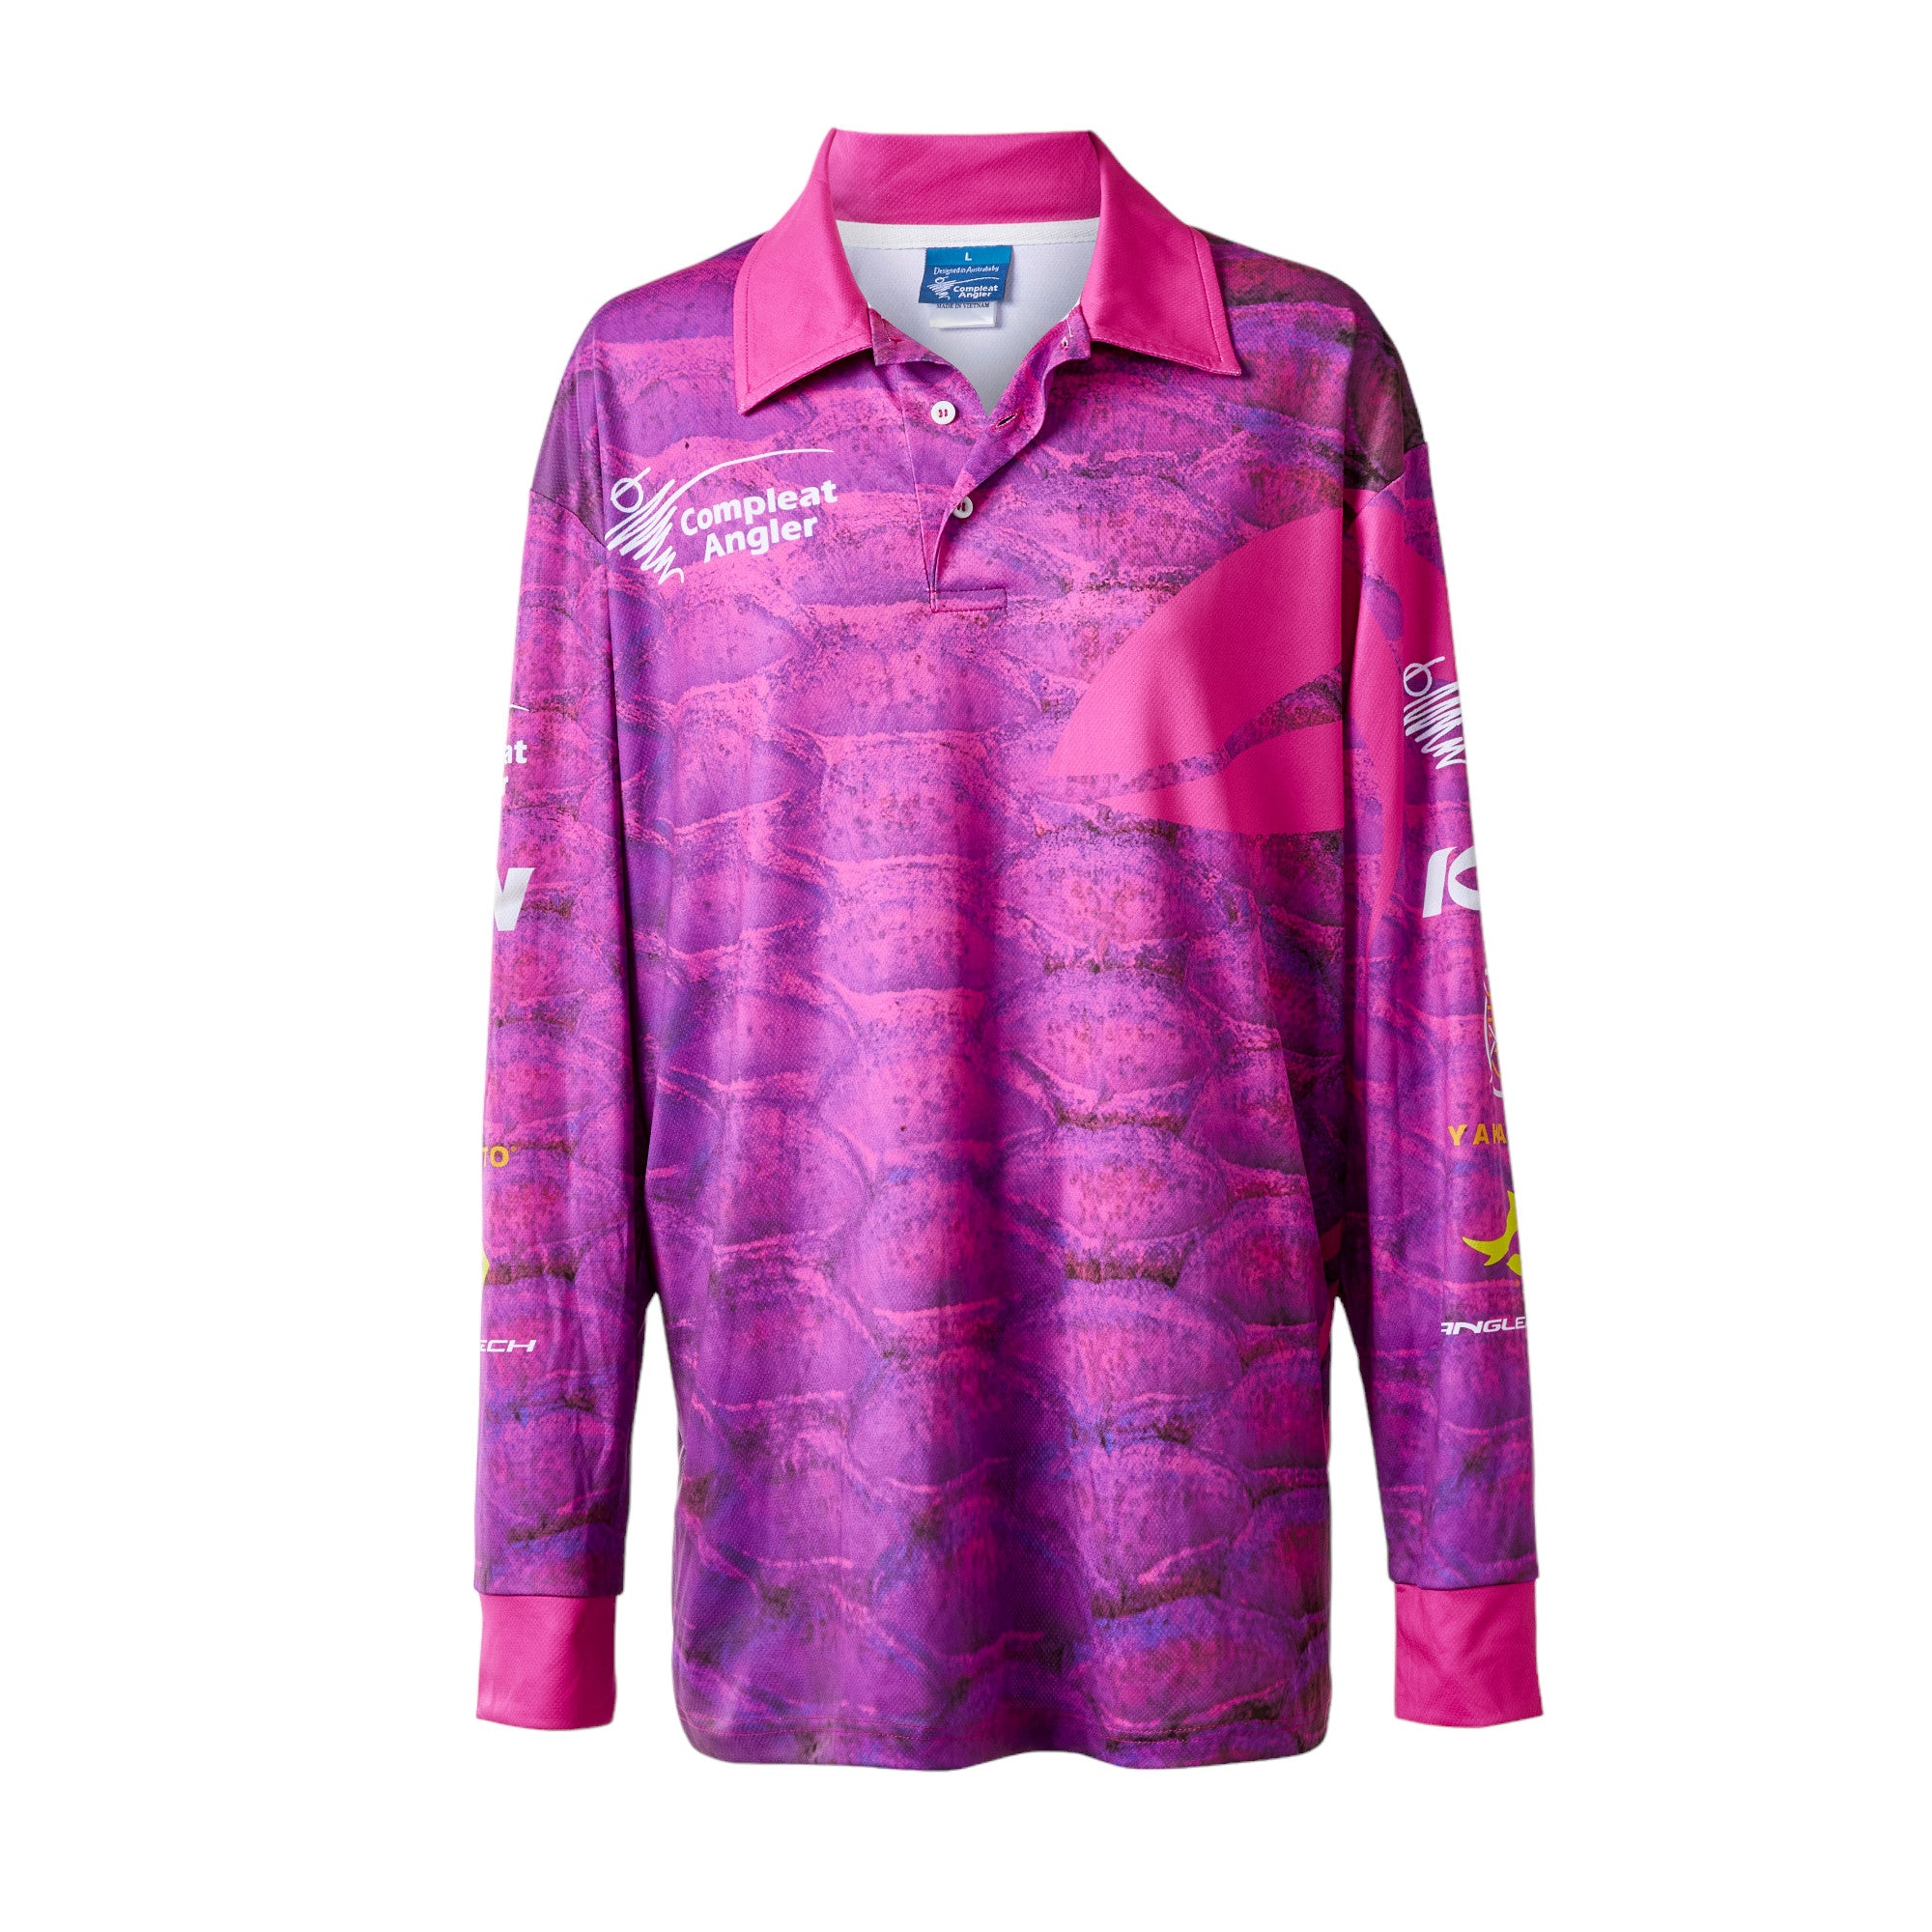 Compleat Angler Pink Scale Tournament Kids Shirt